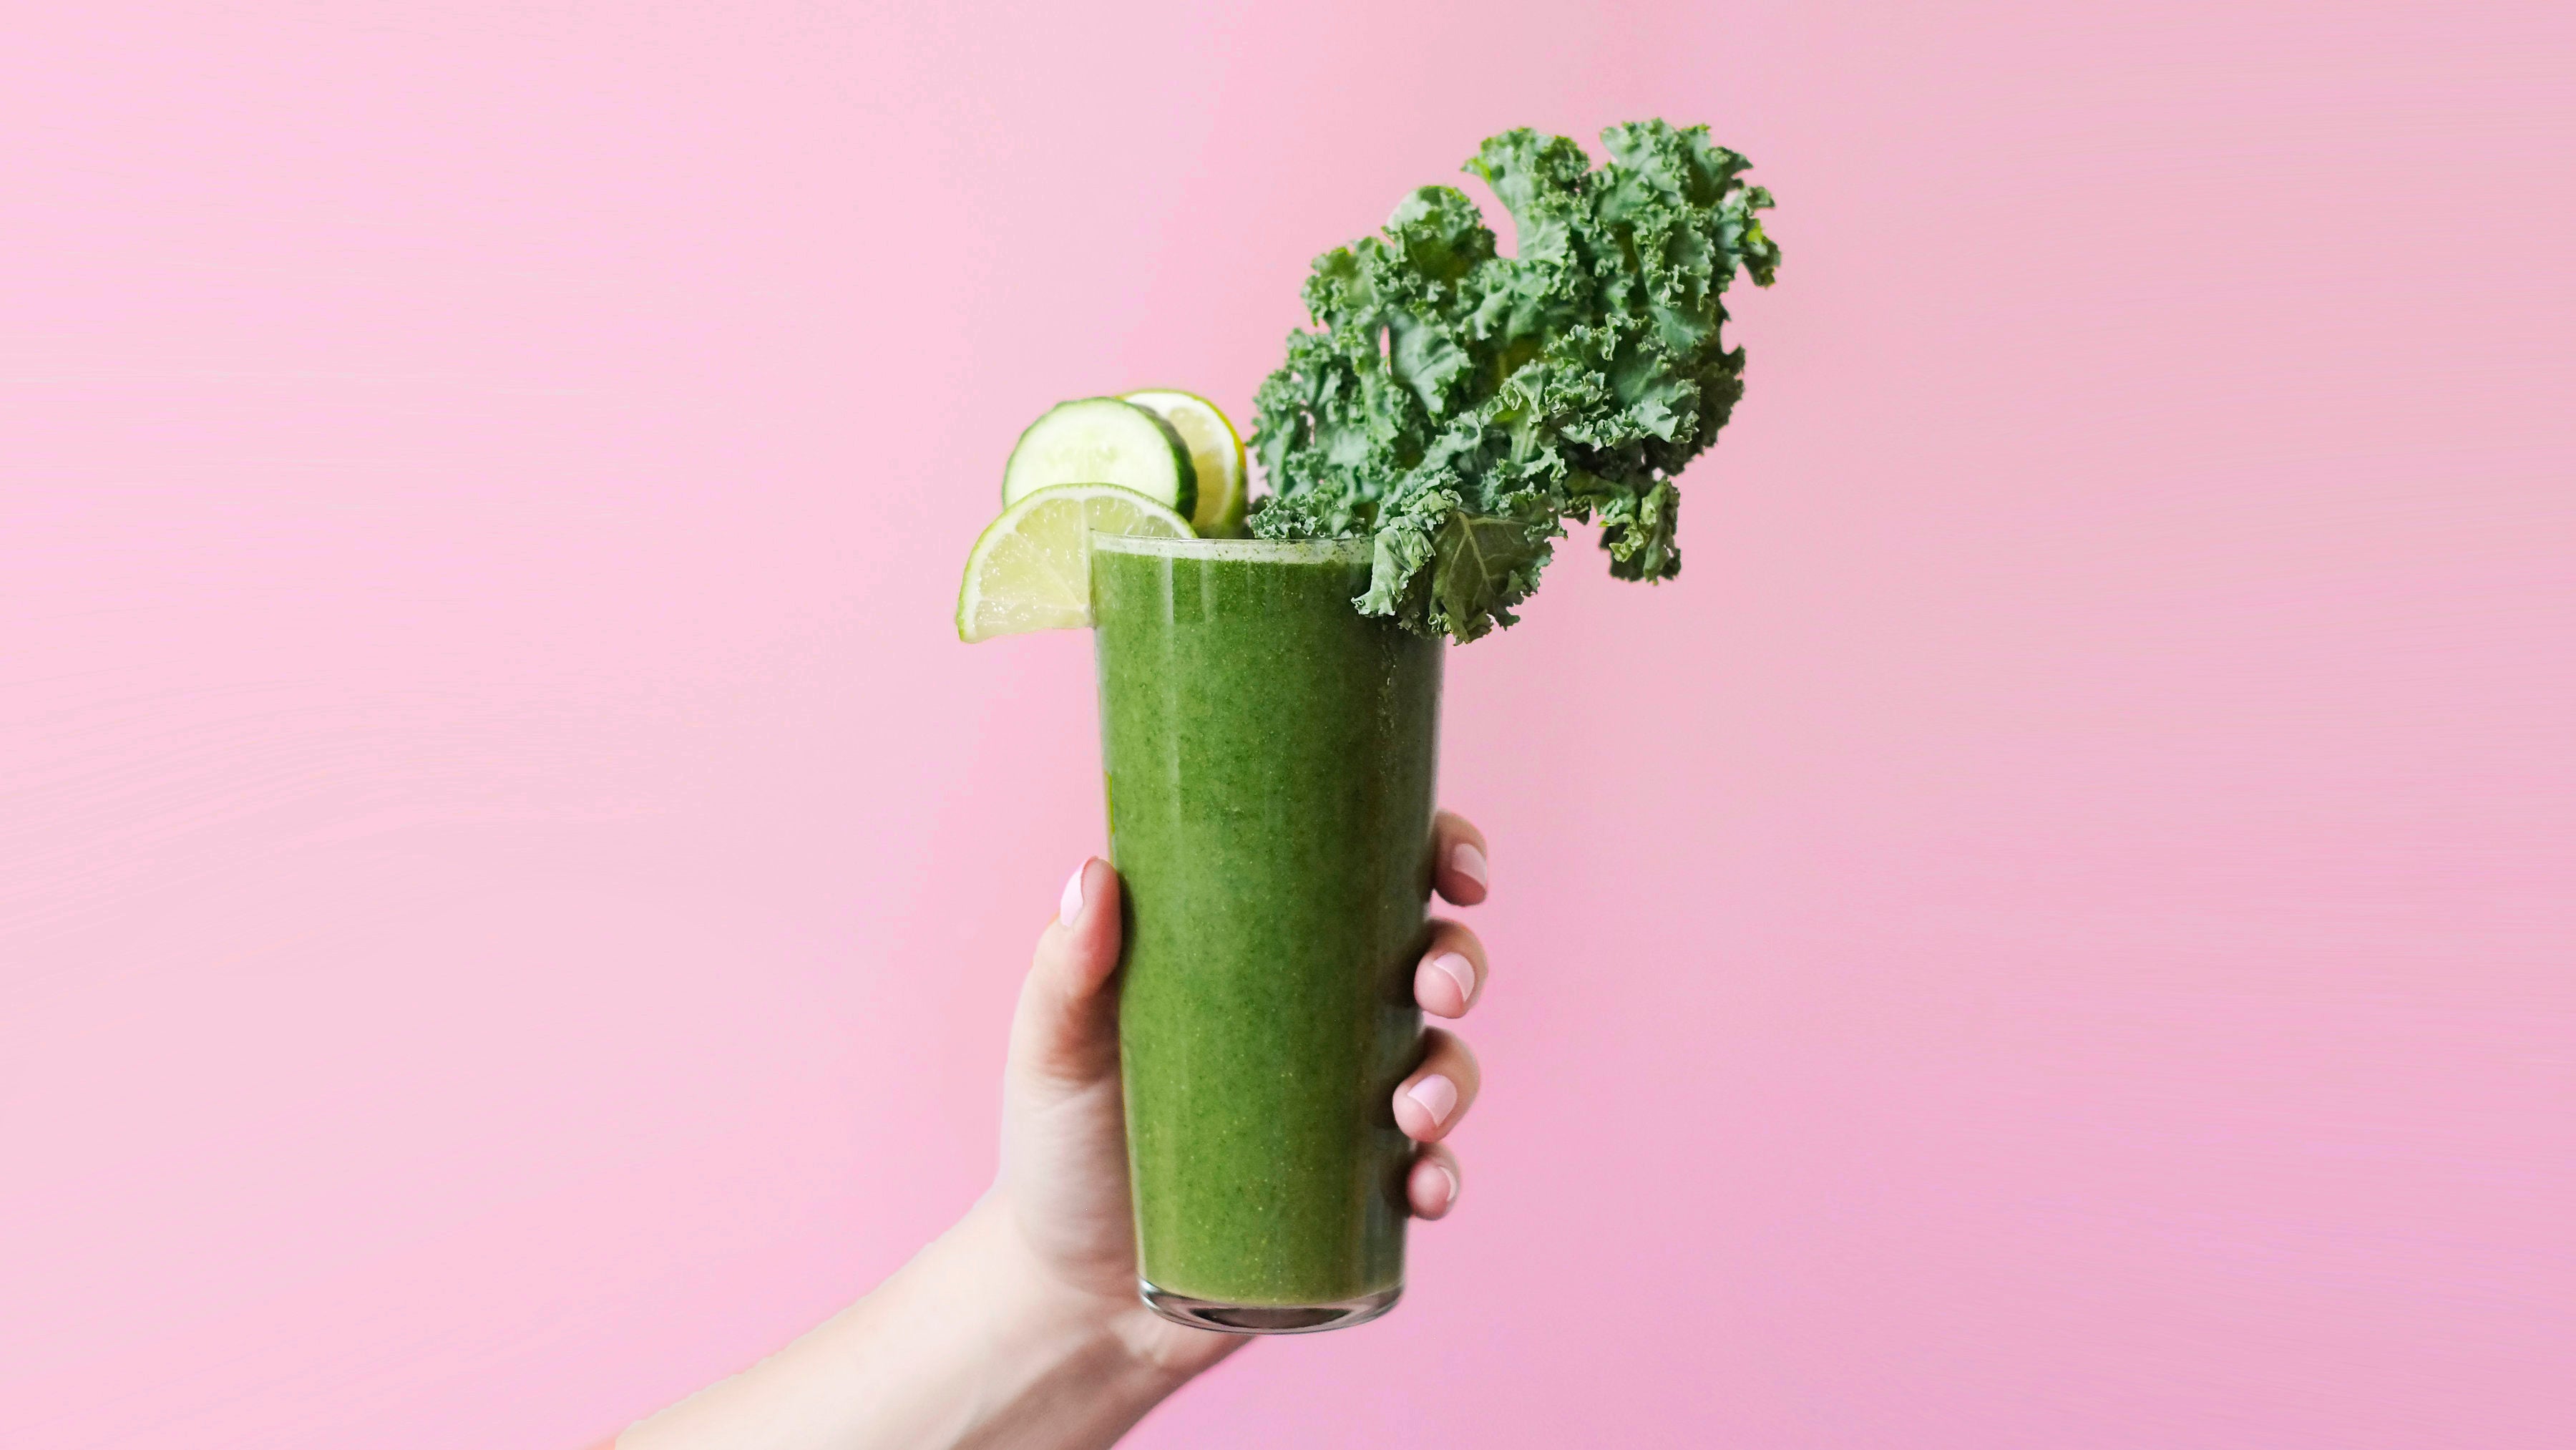 Cucumber, Lime, and Kale Smoothie